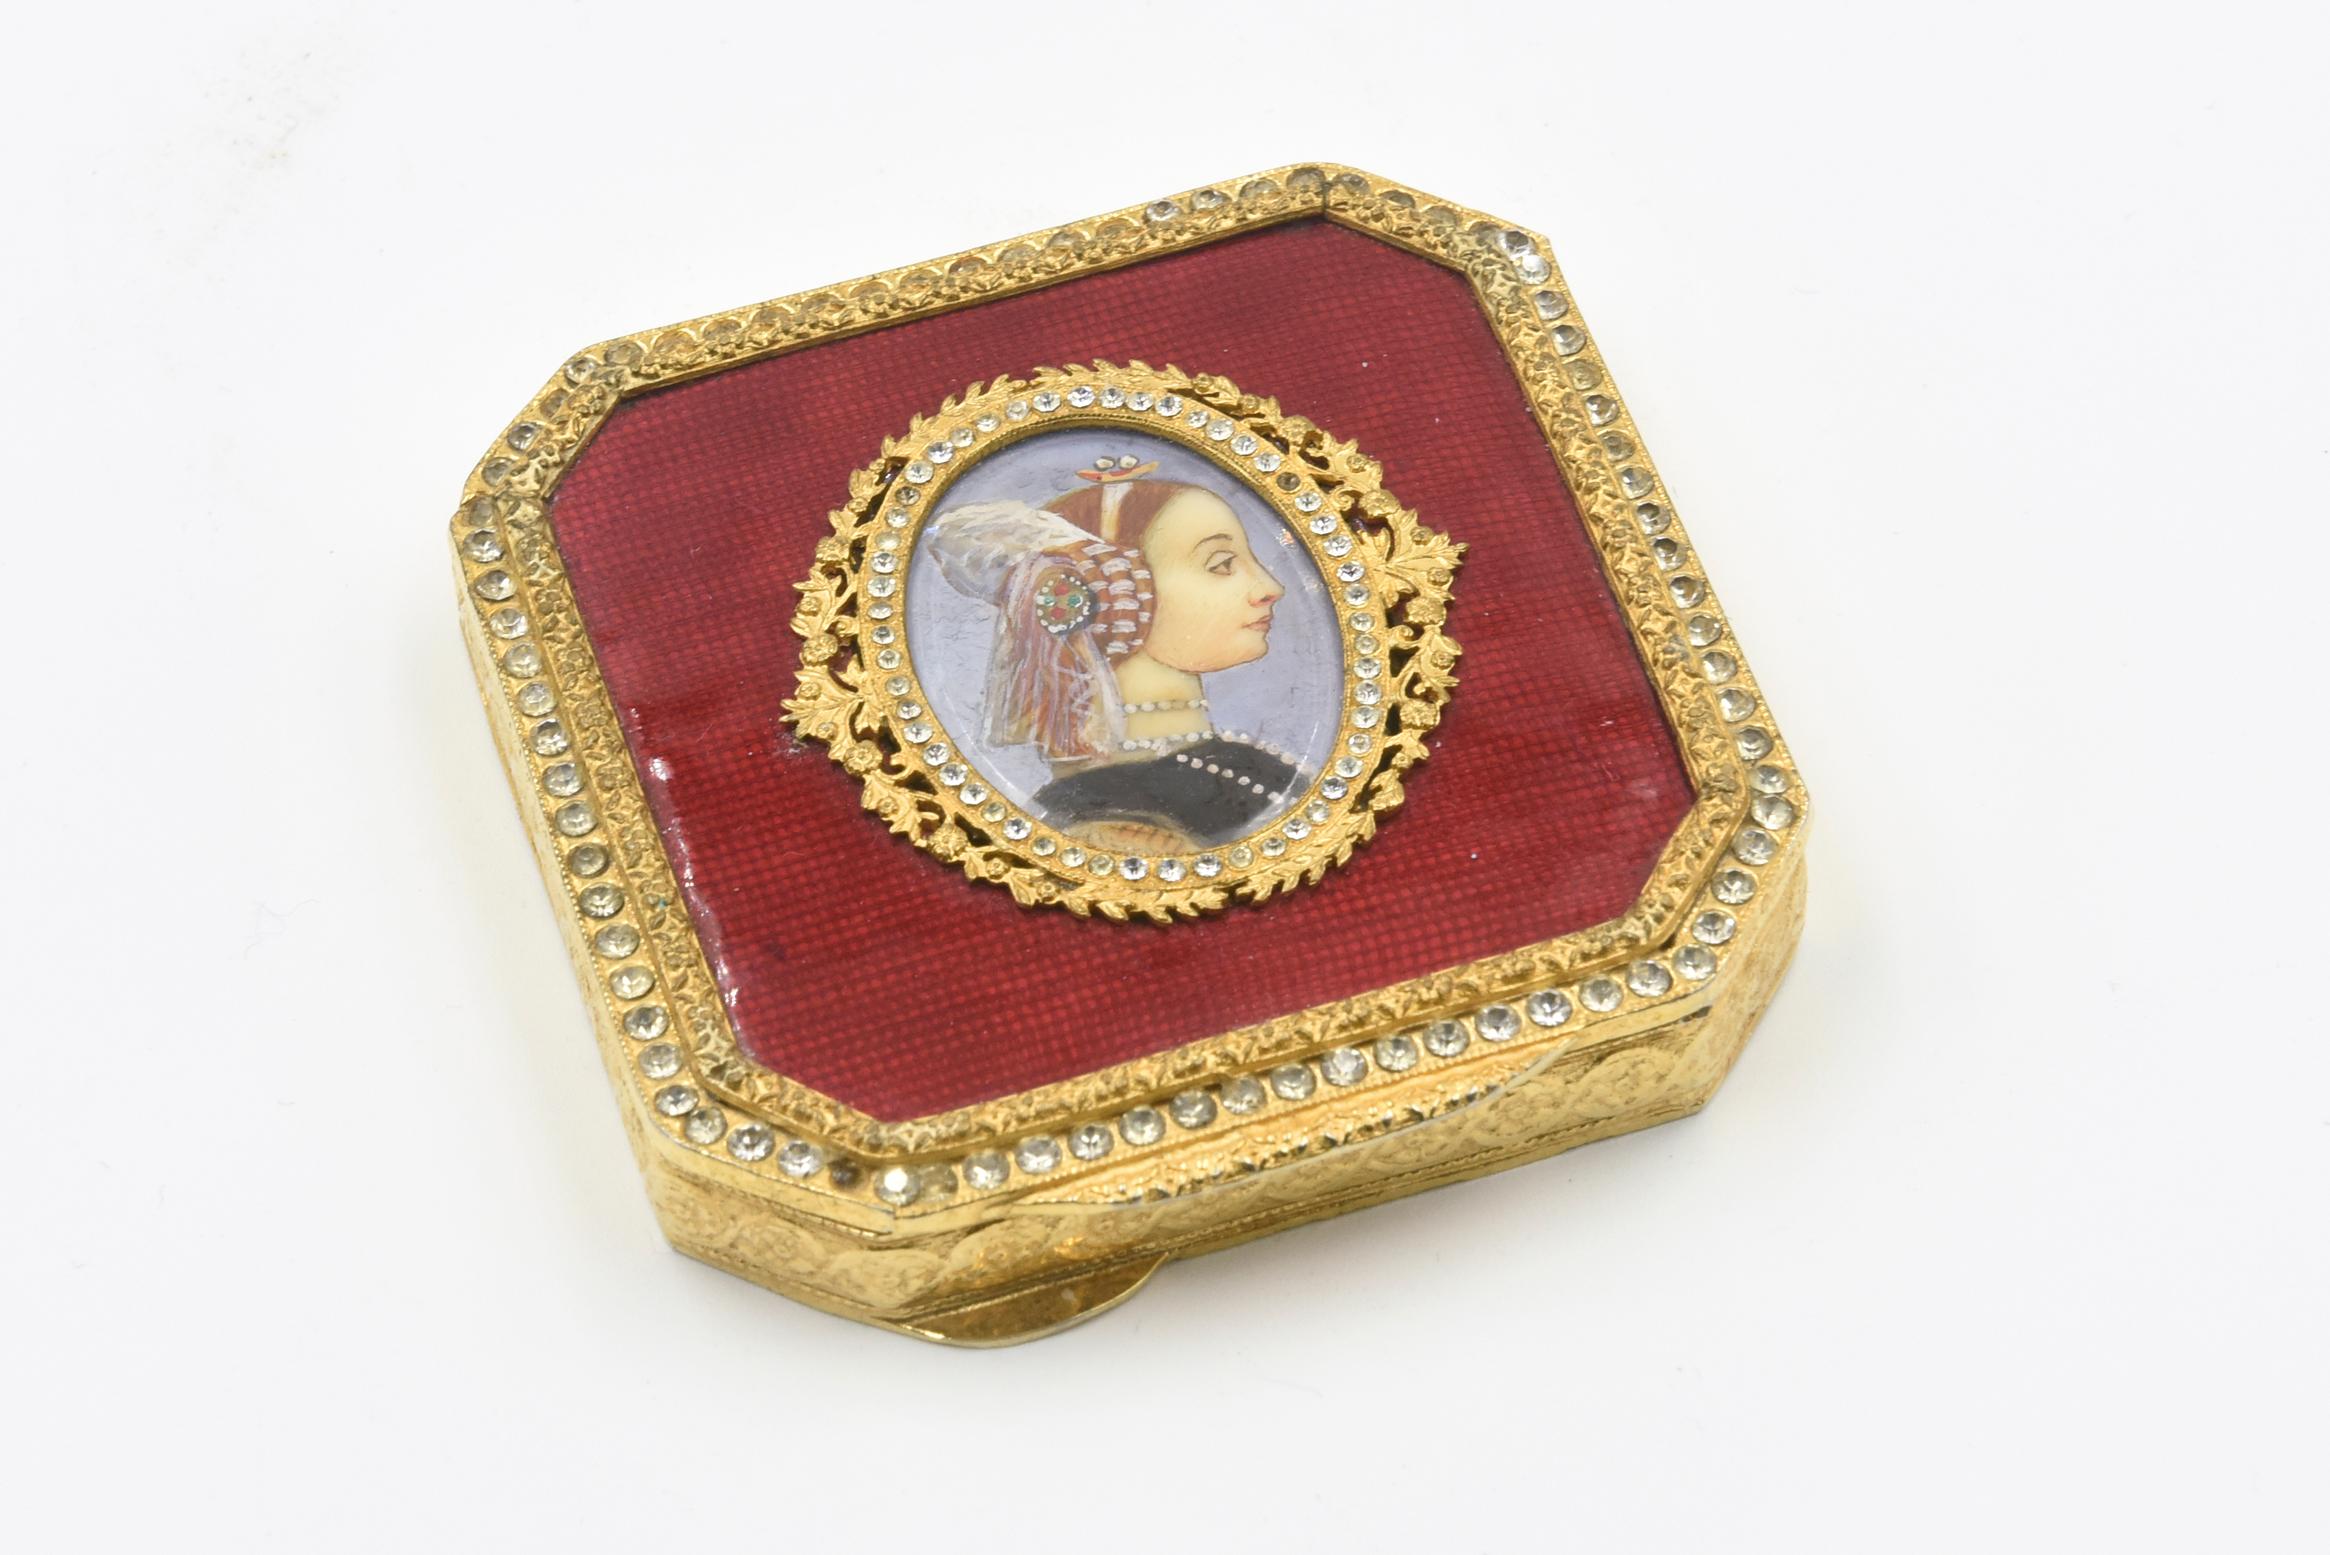 Square guilloche enamel gilt jeweled compact with hand painted portrait of a period lady.
This gold tone metal compact with red guilloche enamel and lovely hand painted lady with an Elizabethan hair piece, green dress with amazing hand painted